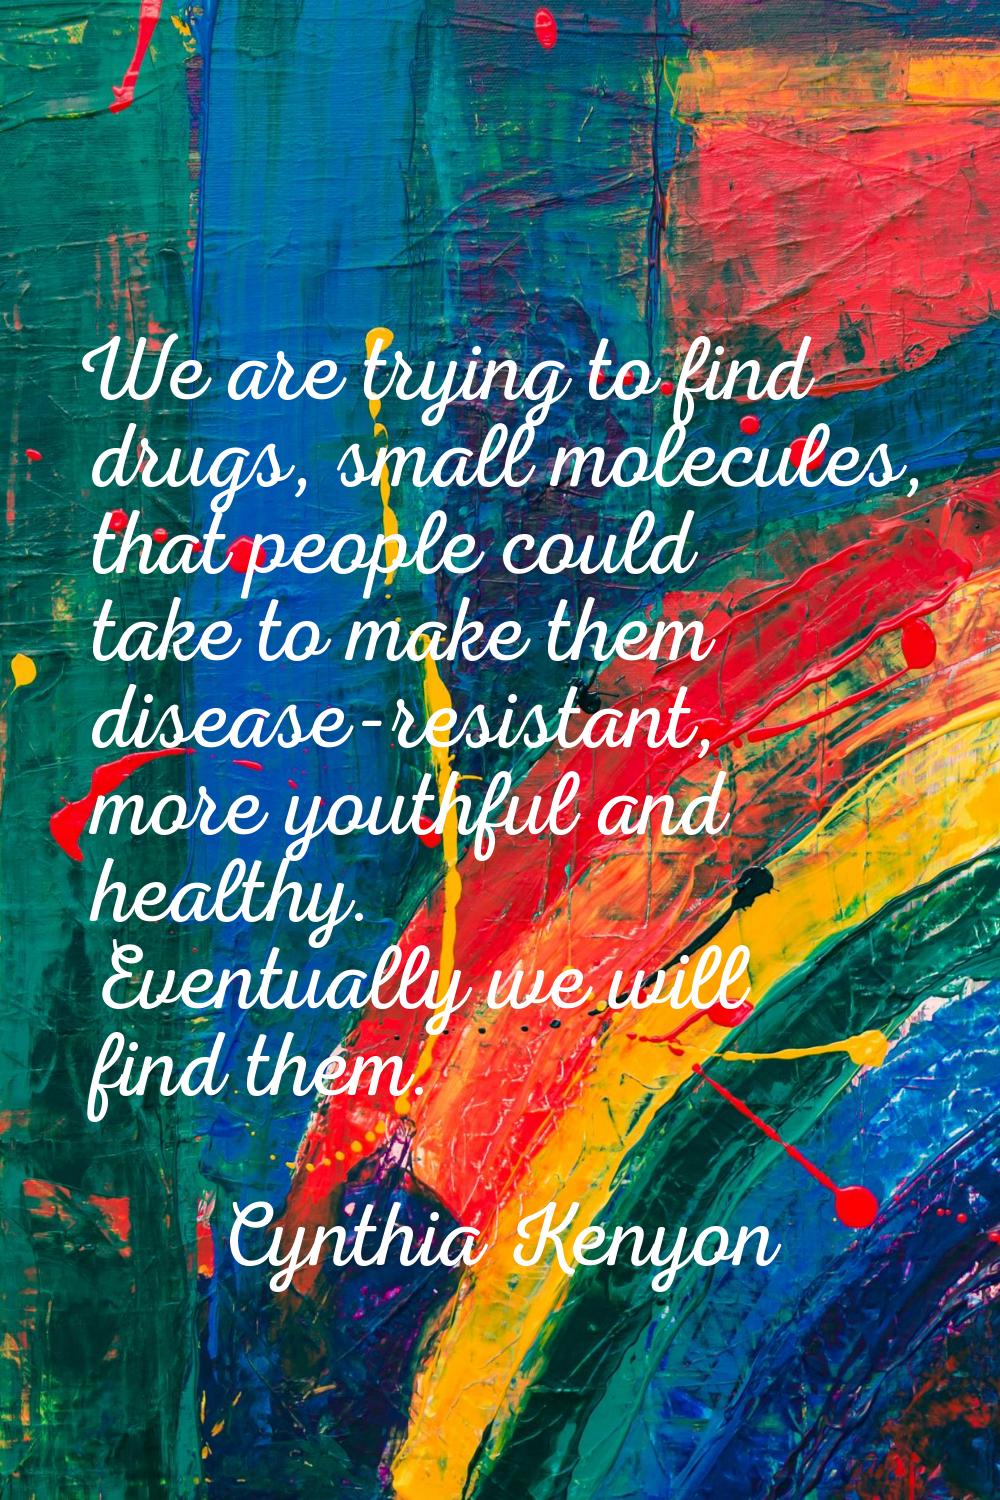 We are trying to find drugs, small molecules, that people could take to make them disease-resistant